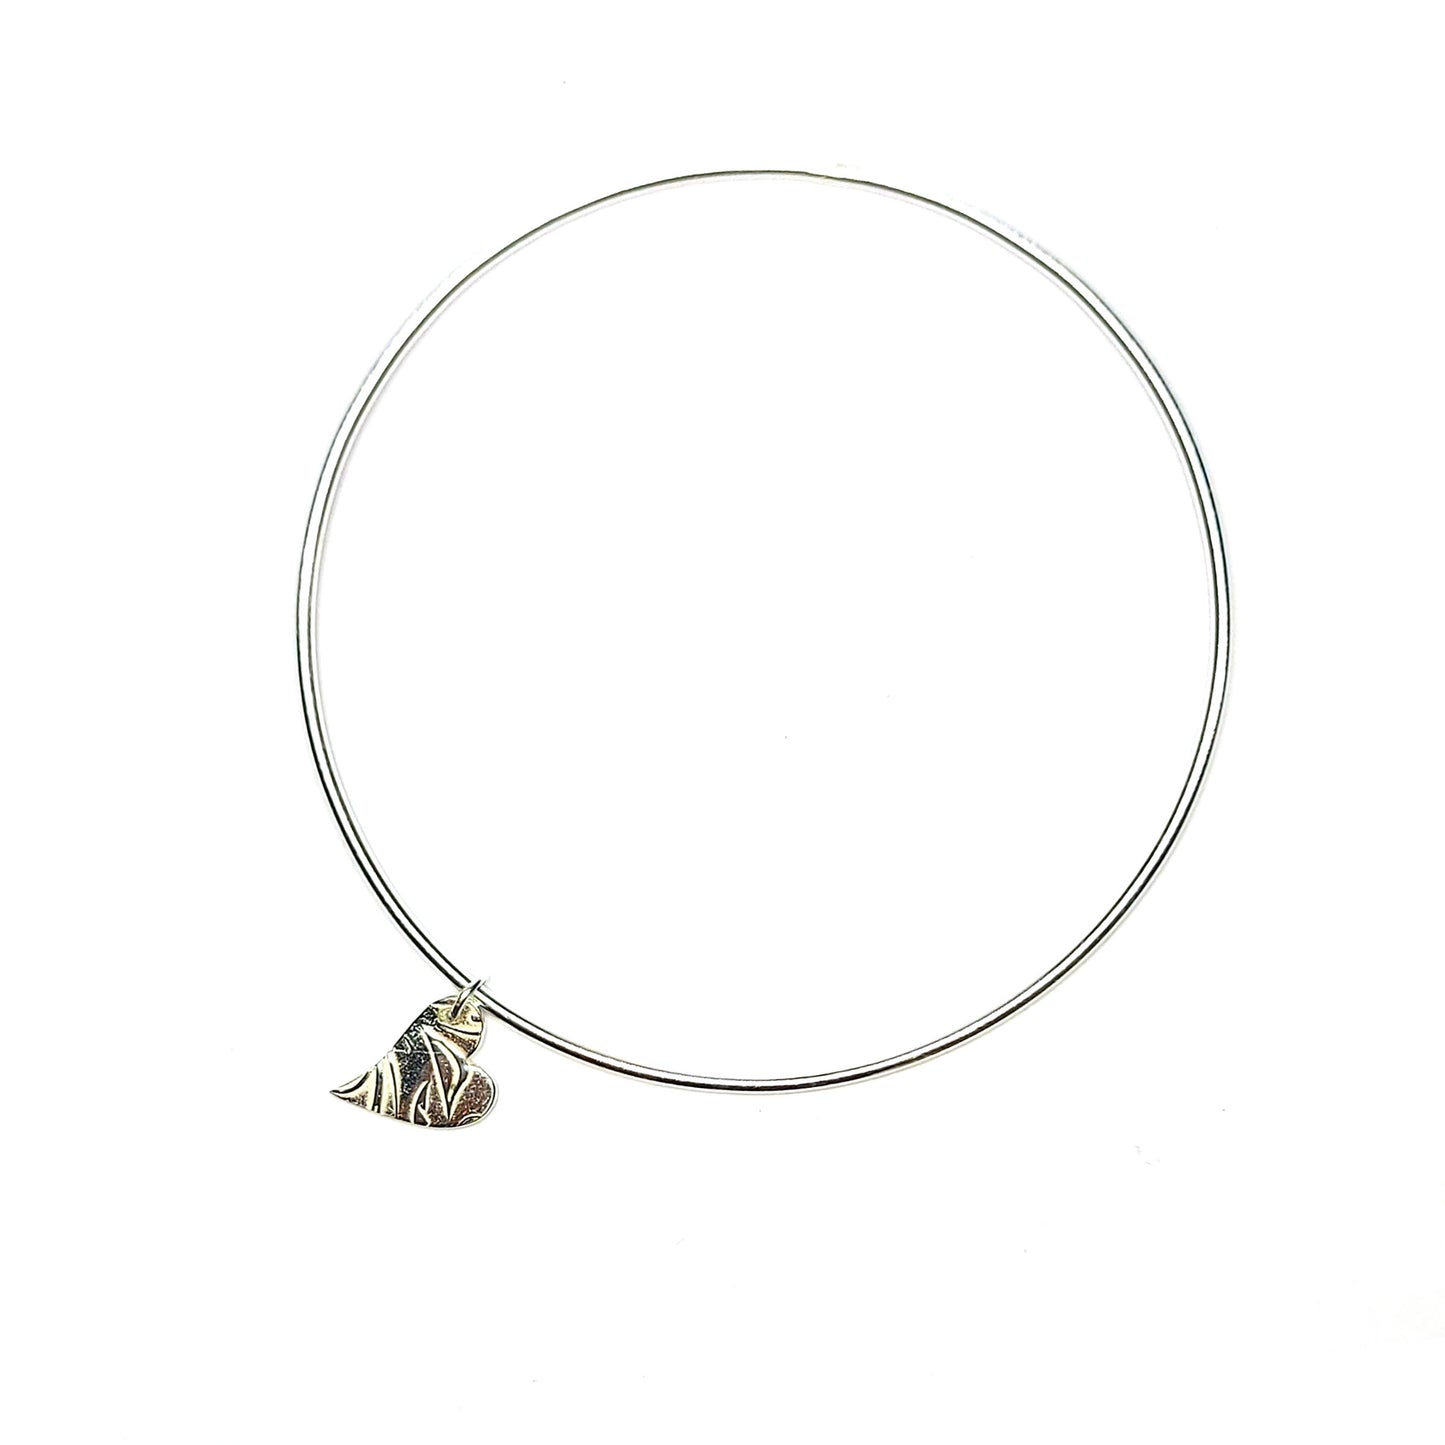 A round silver bangle with an asymmetrical patterned heart charm.